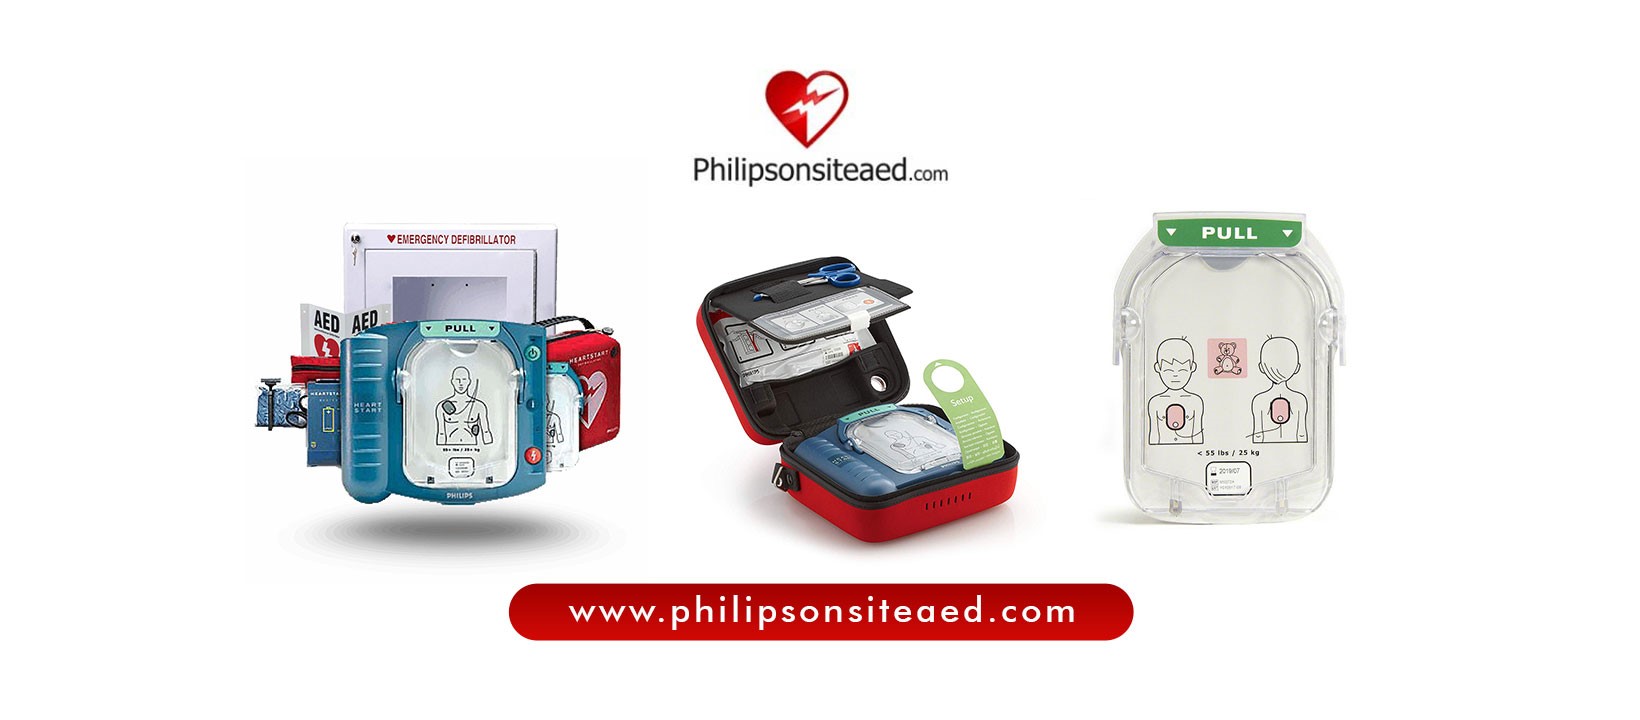 Philips Onsite AED m5066a